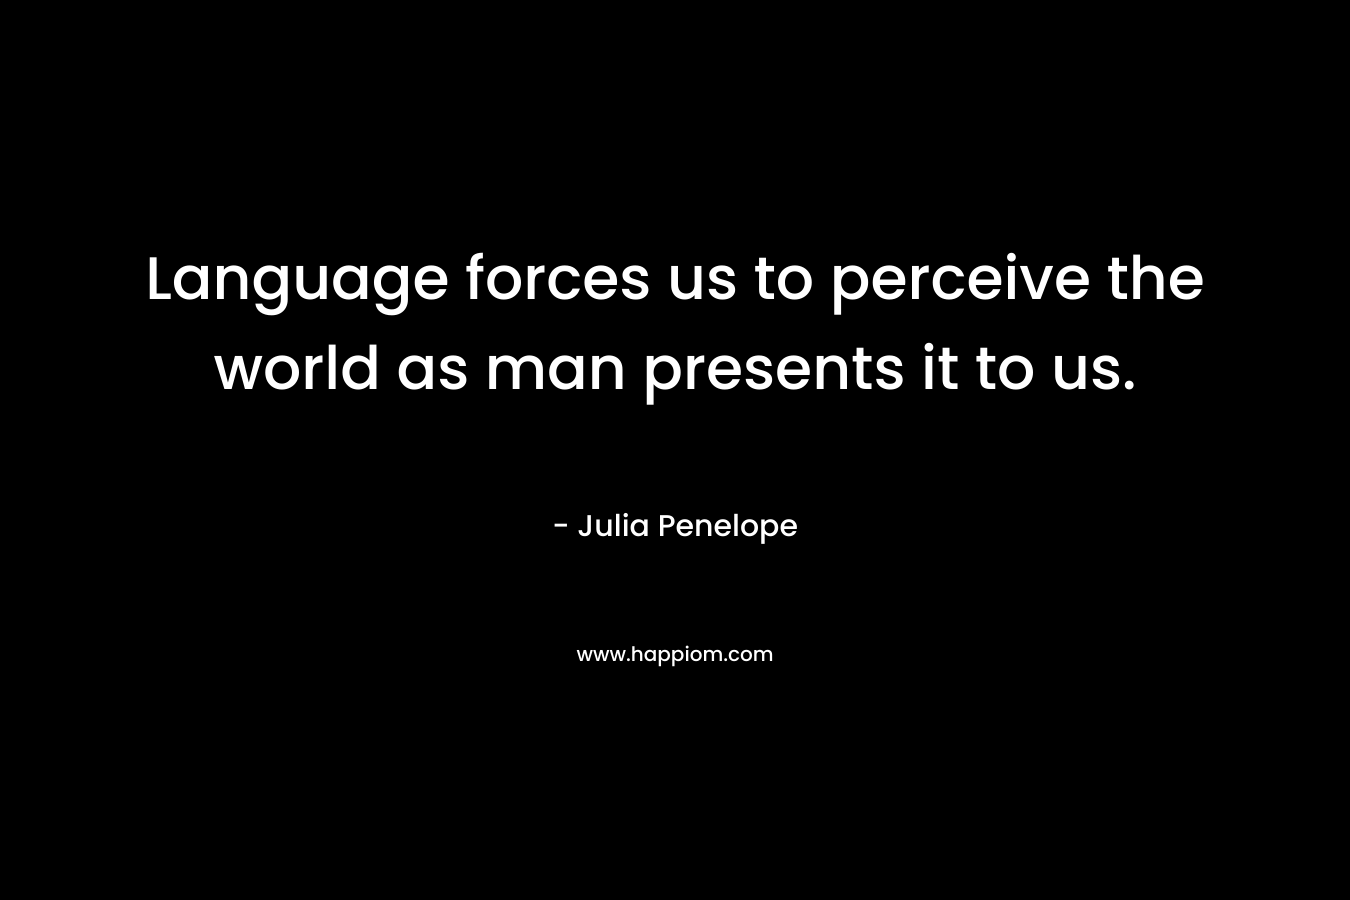 Language forces us to perceive the world as man presents it to us.